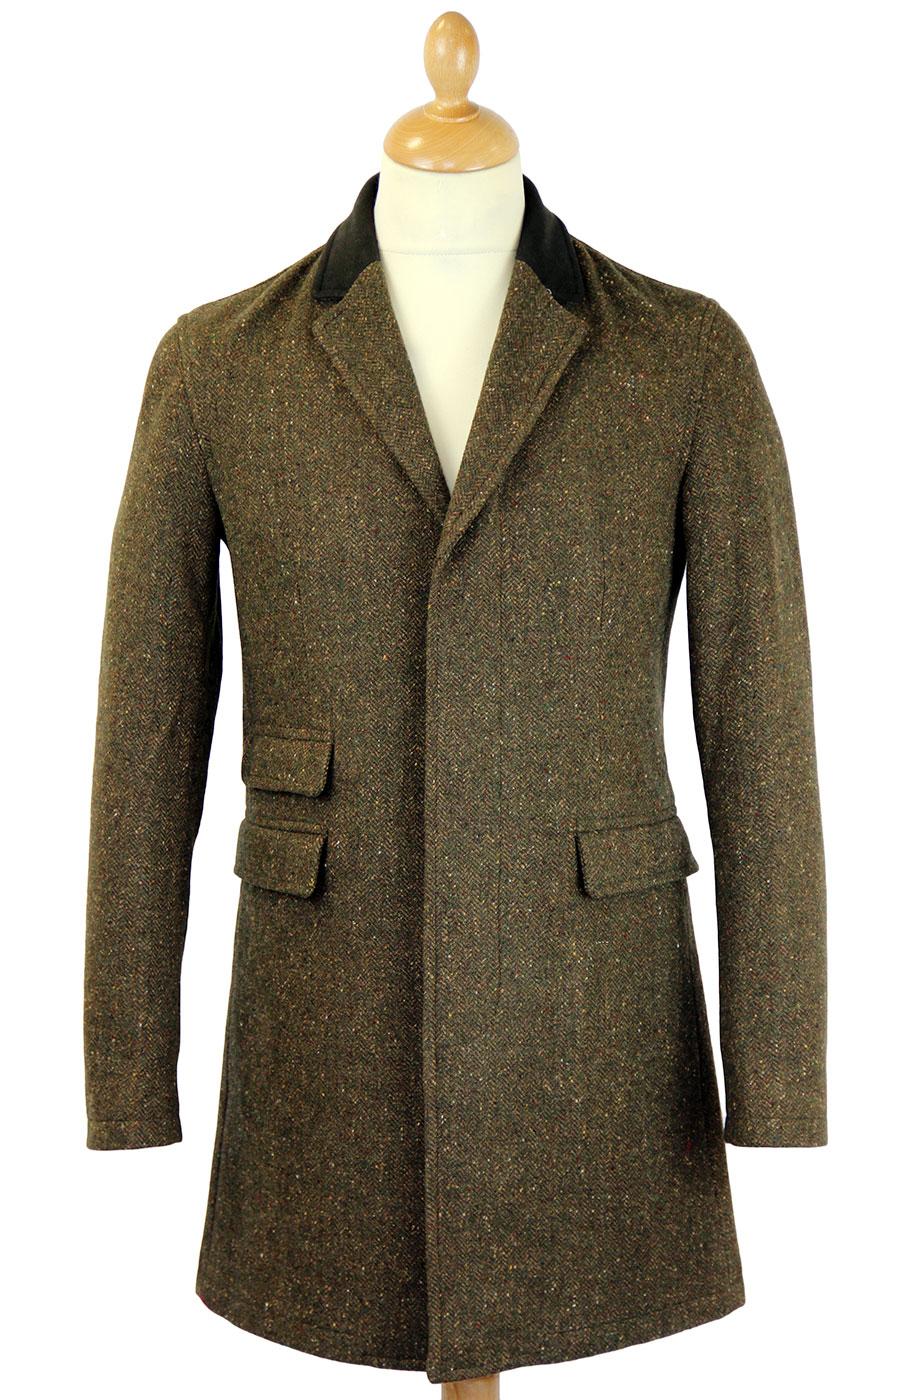 TAILORED by MADCAP ENGLAND Retro Mod Donegal Top Coat Brown